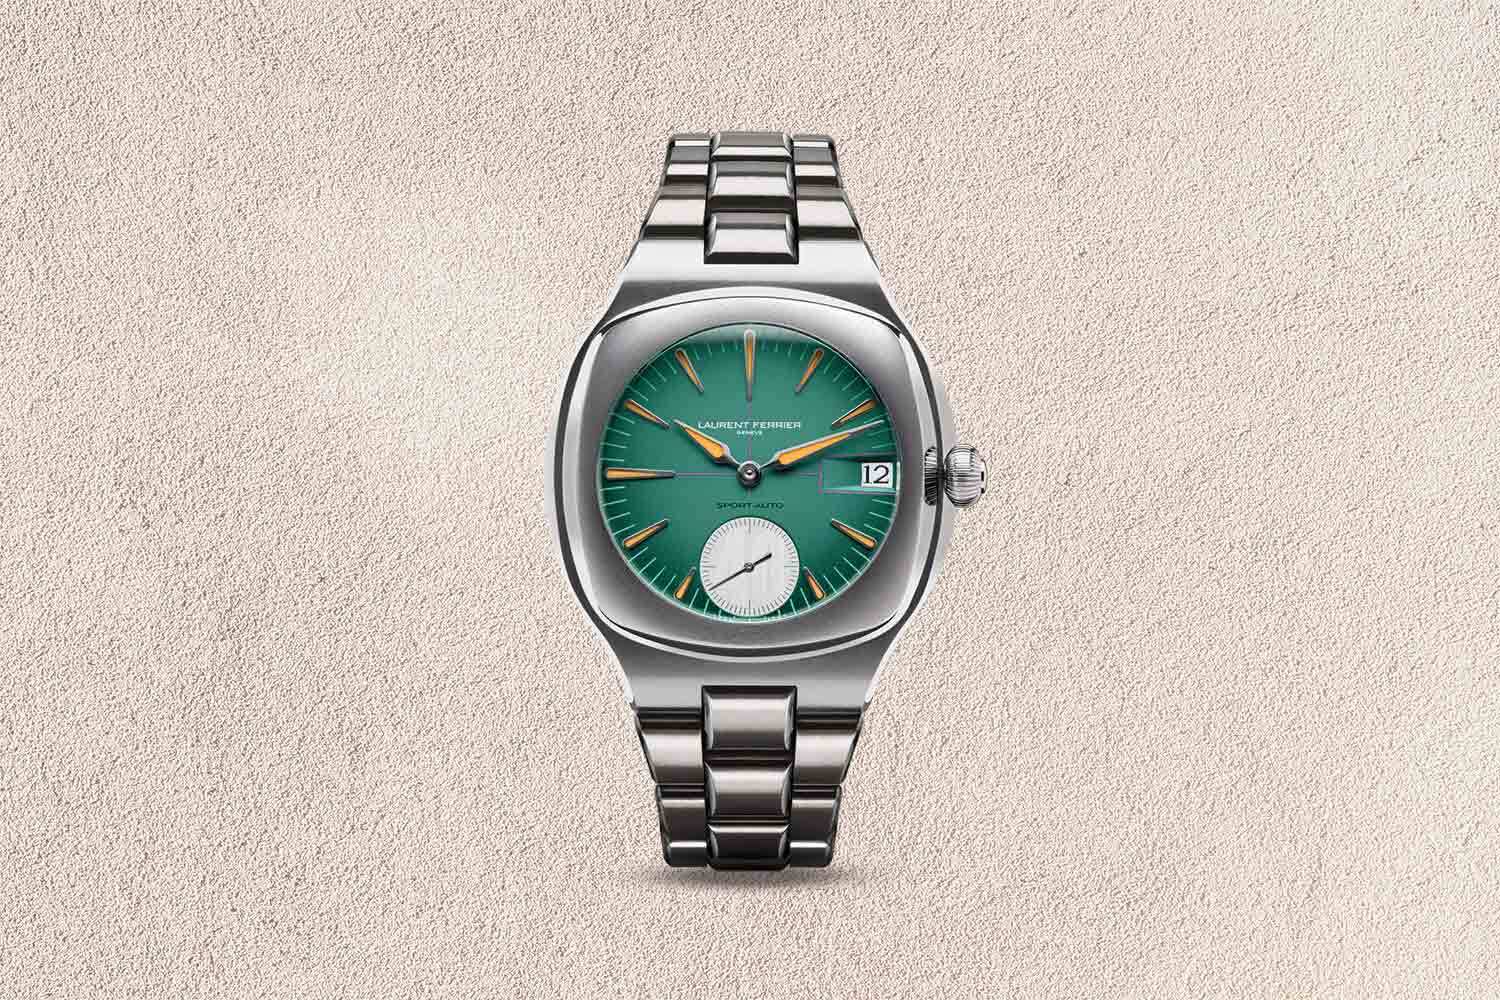 SIlver and green watch